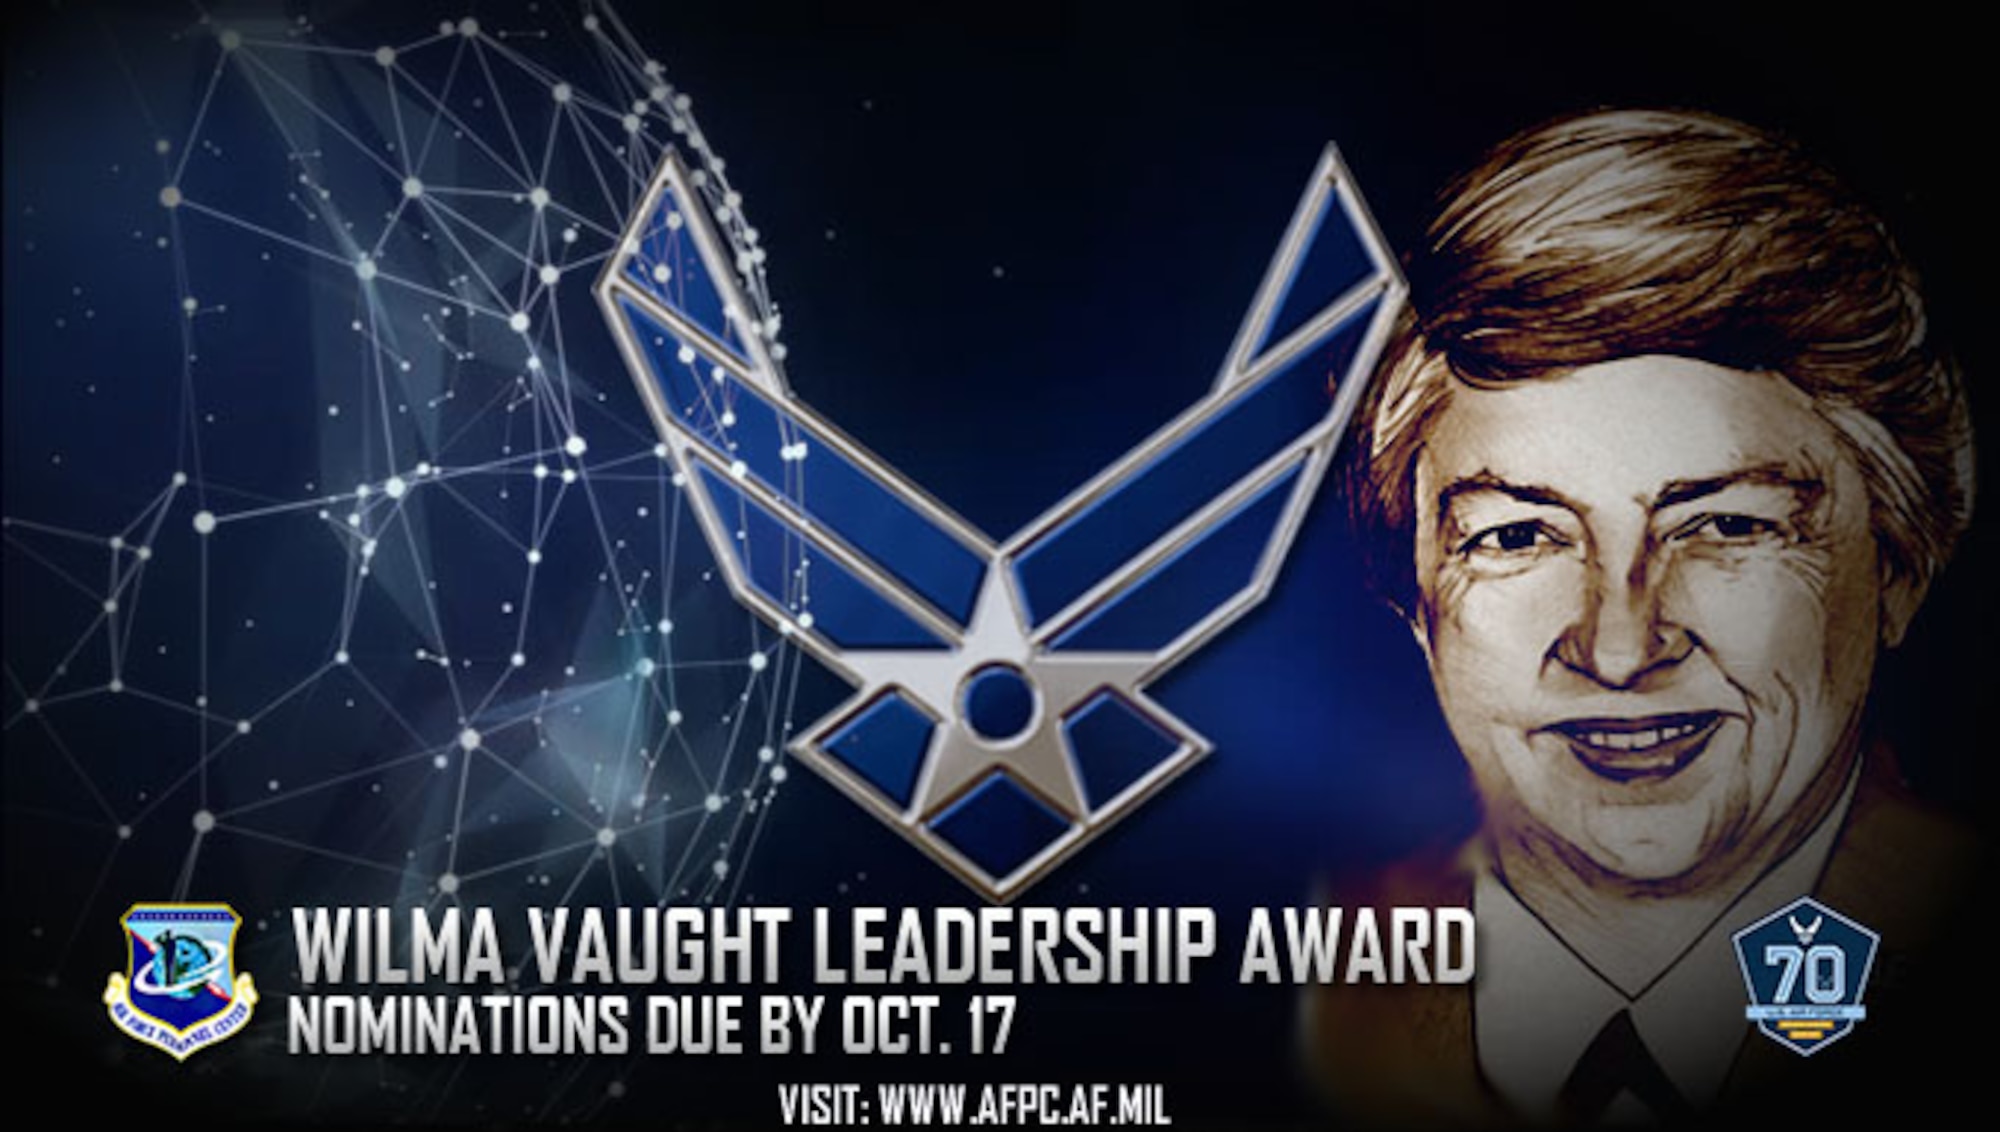 Wilma Vaught leadership award nominations due by Oct. 17